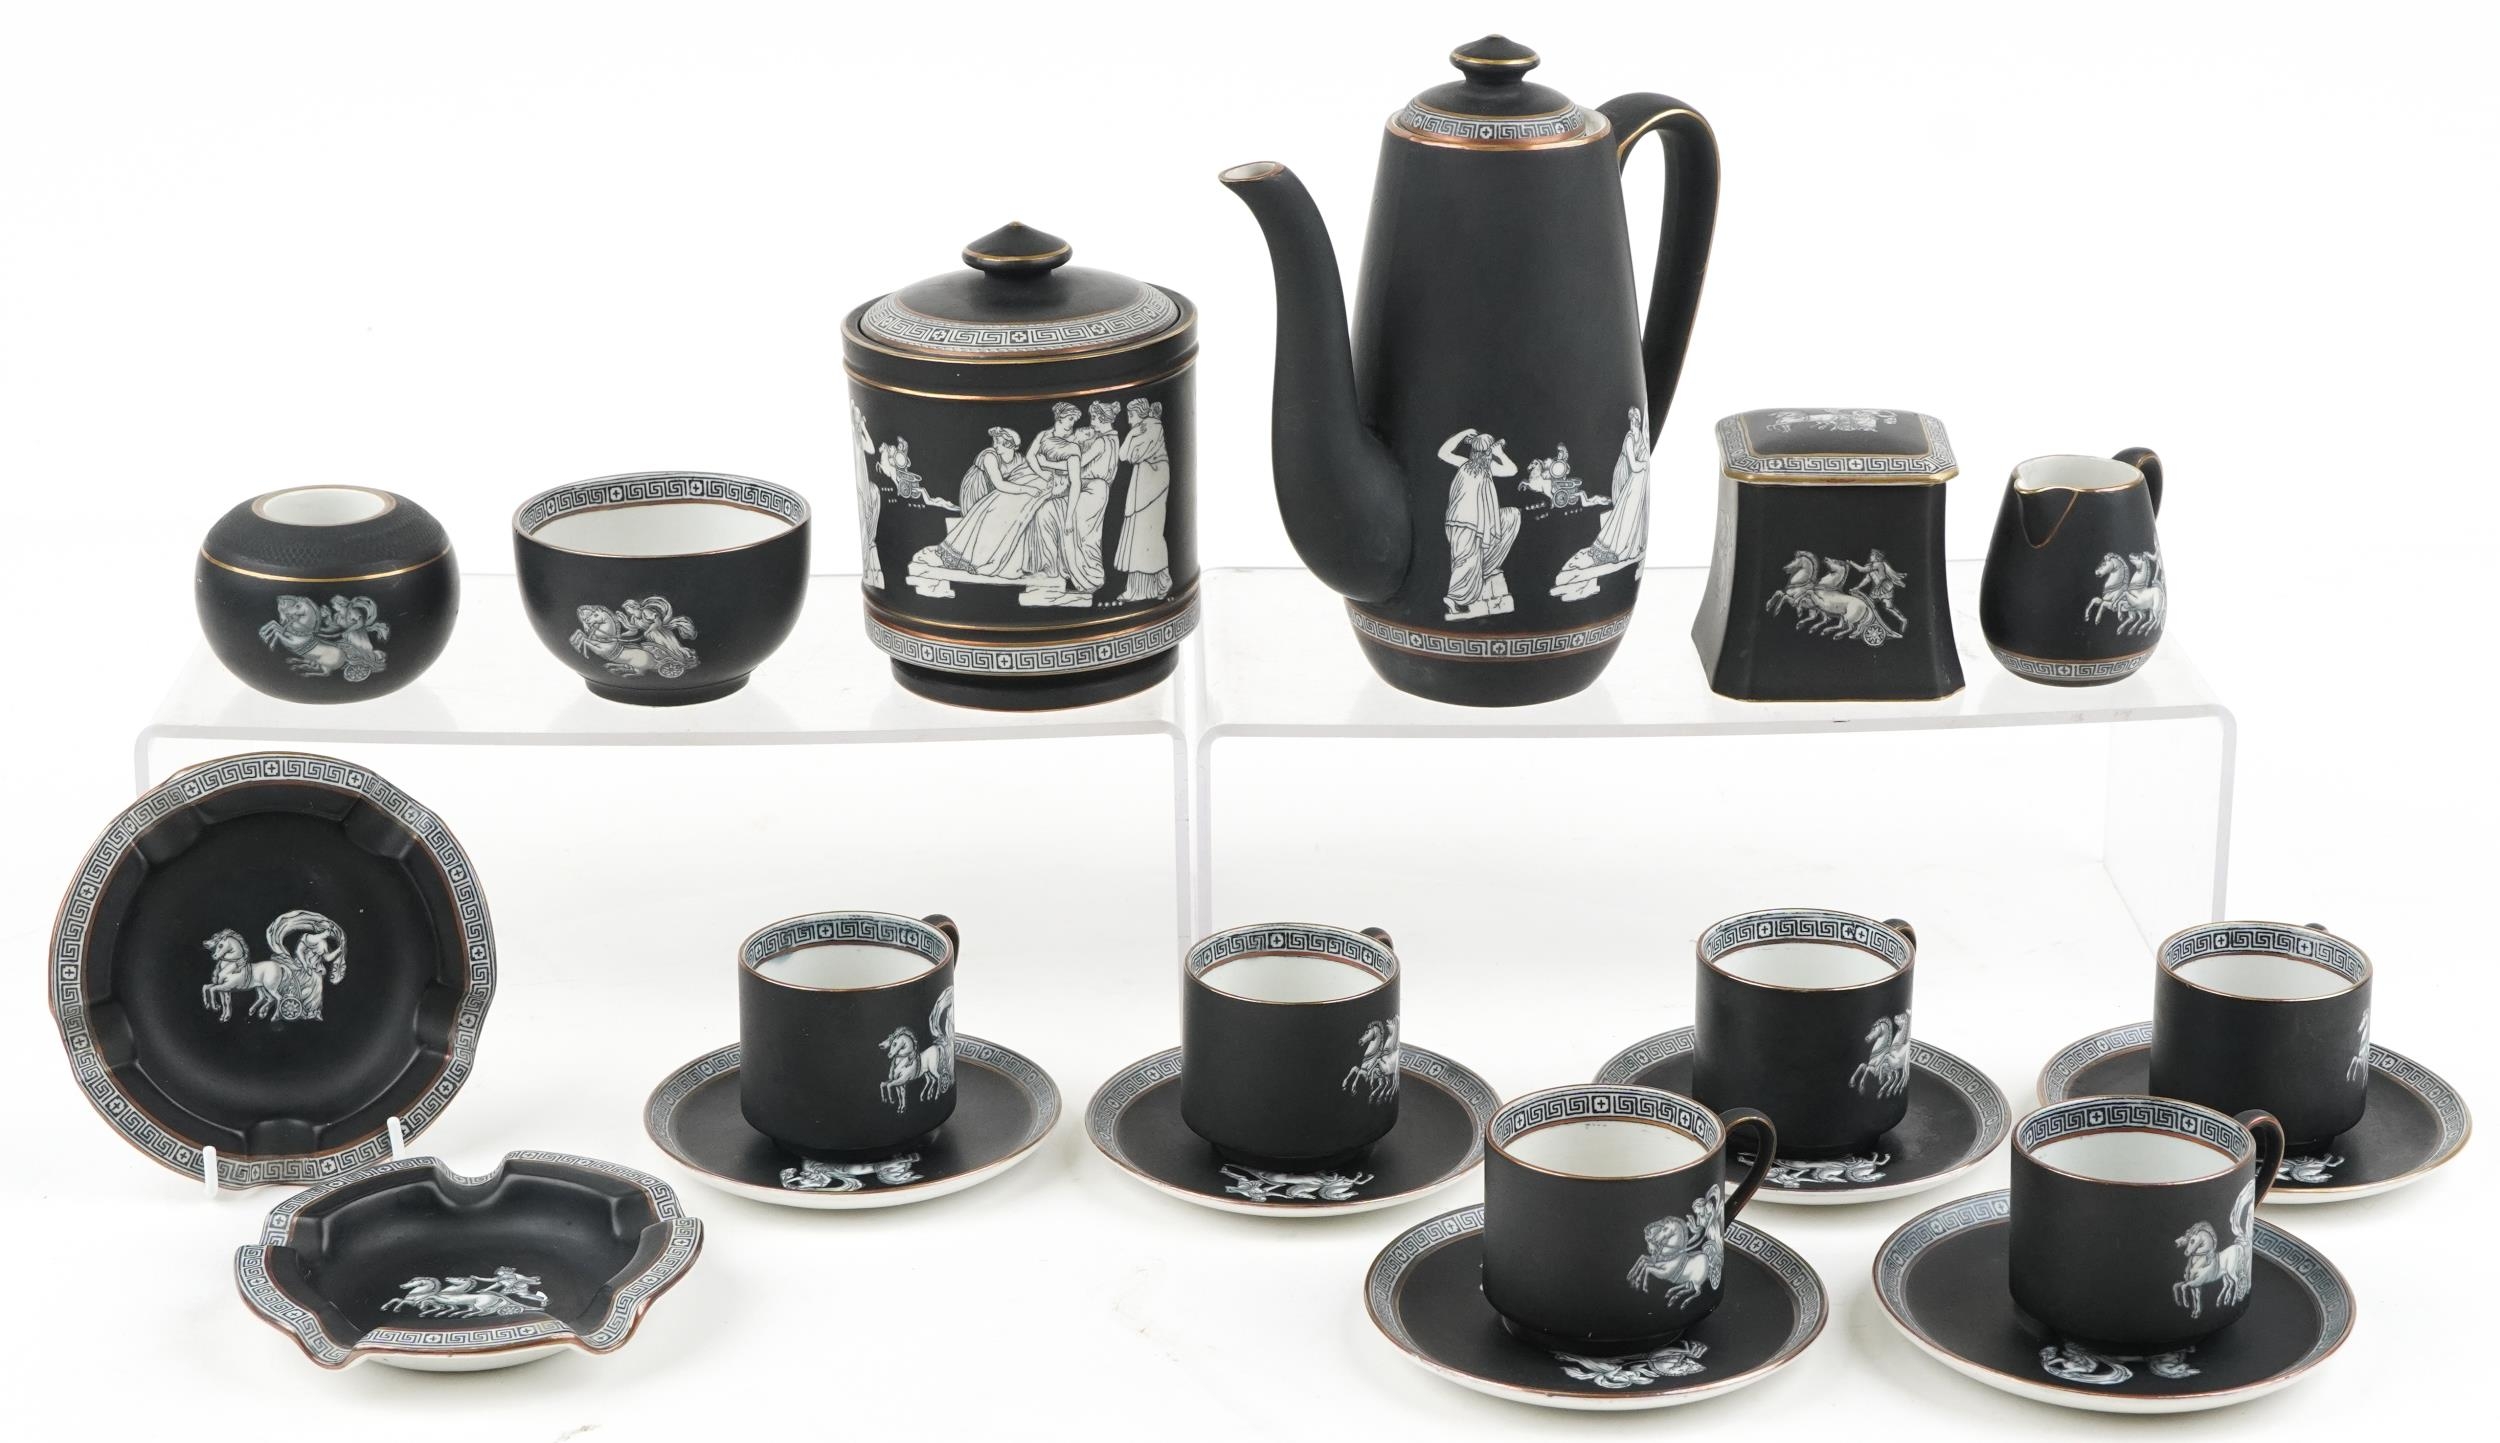 Victorian Fenton and Pratt Old Greek teaware including a six place coffee service comprising